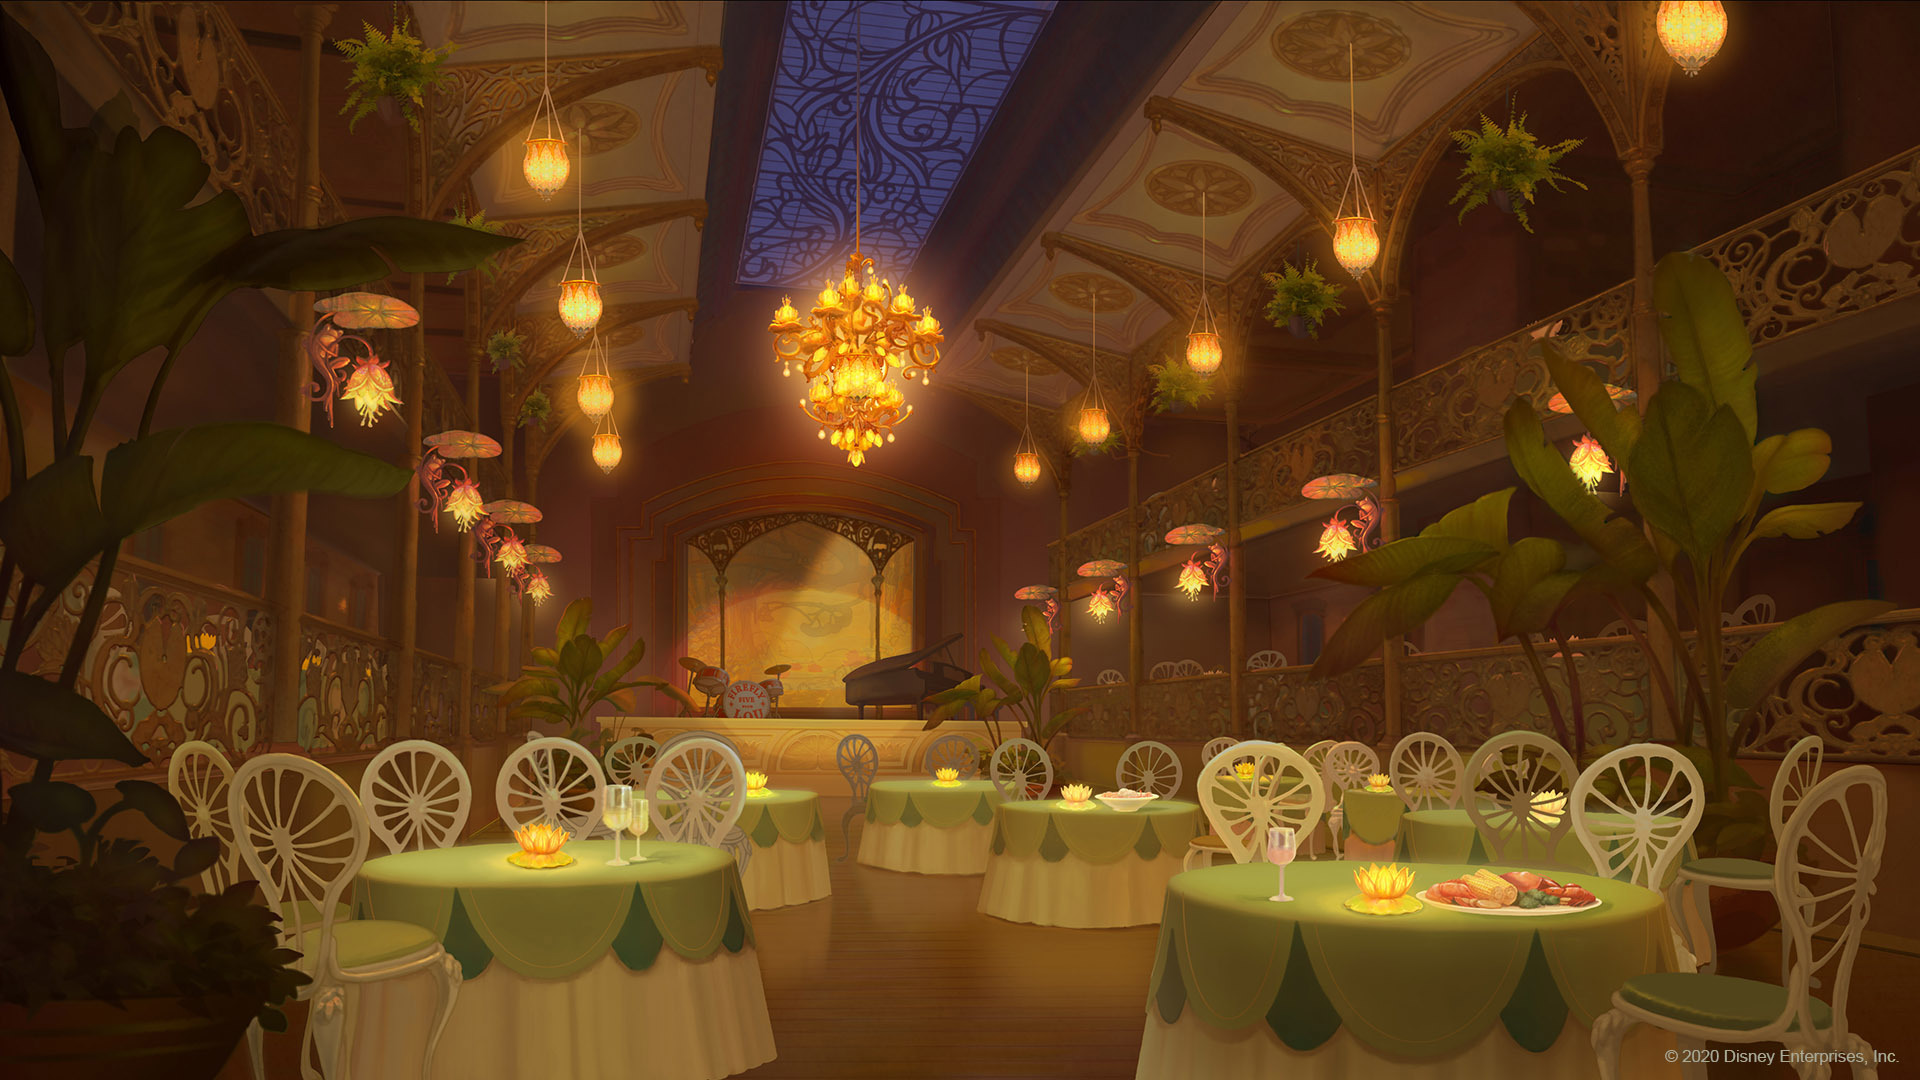 Disney - The Princess and the Frog Background for Teams or Zoom